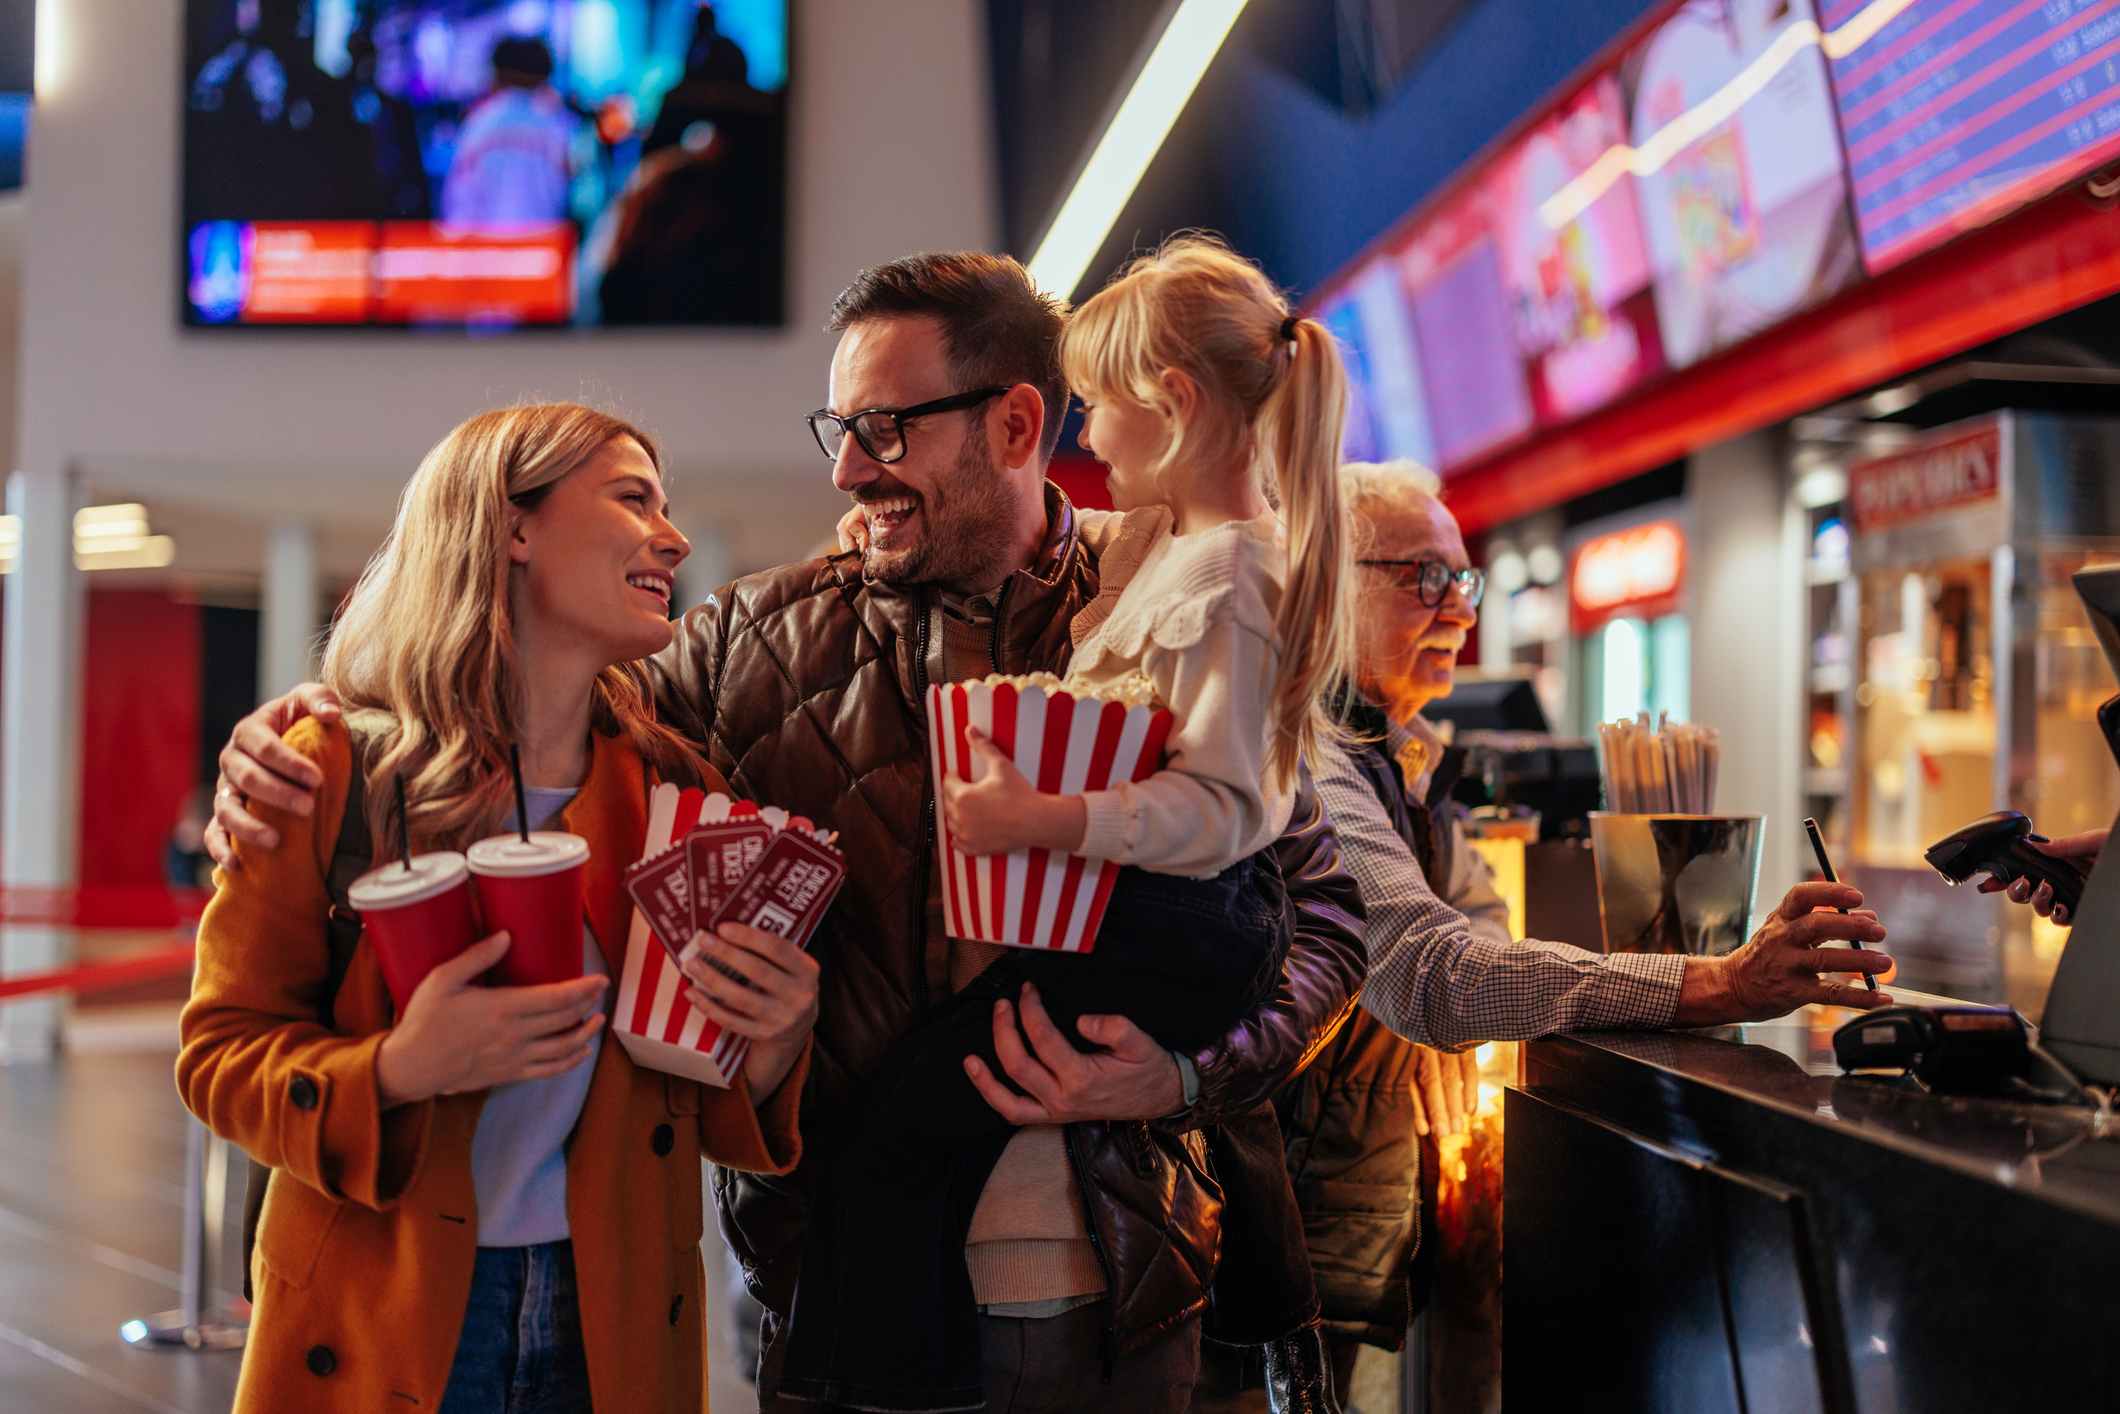 Dine While Watching Your Favorite Movies at Conroe Star Cinema Grill